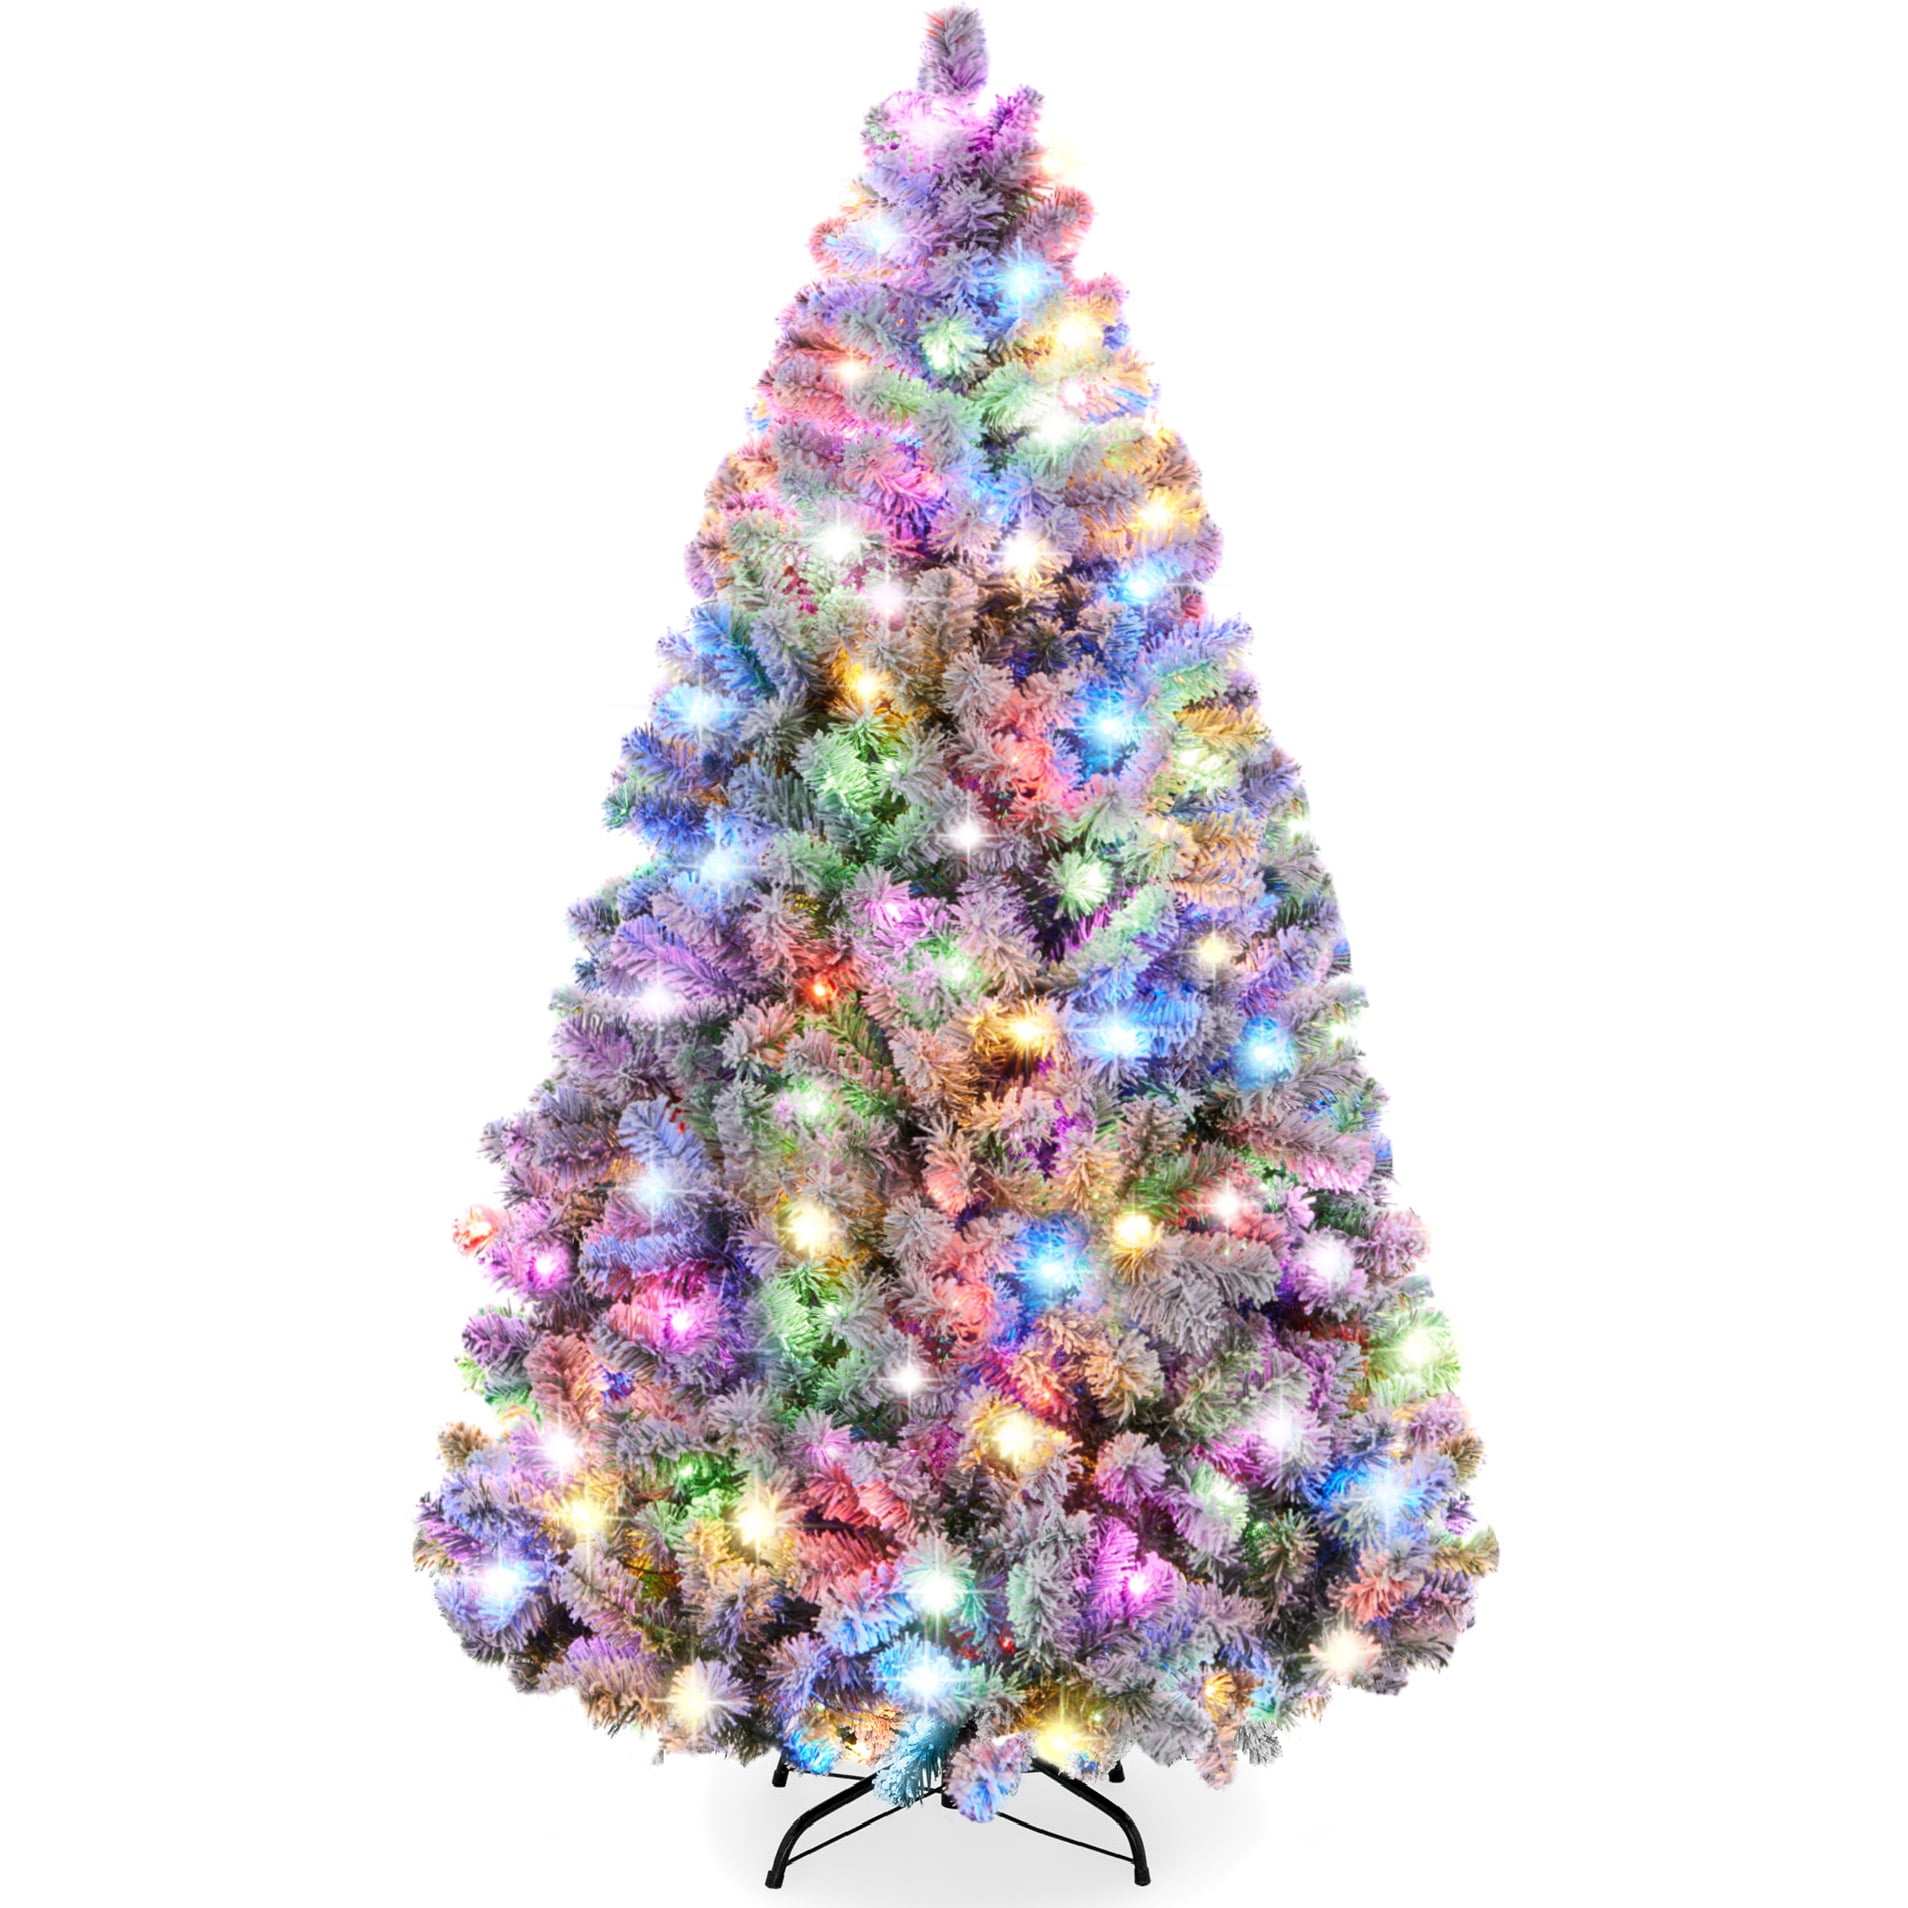 Best Choice Products 6ft Pre-Lit Holiday Christmas Pine Tree w/ Flocked Branches, 250 Warm-White & Multicolored Lights